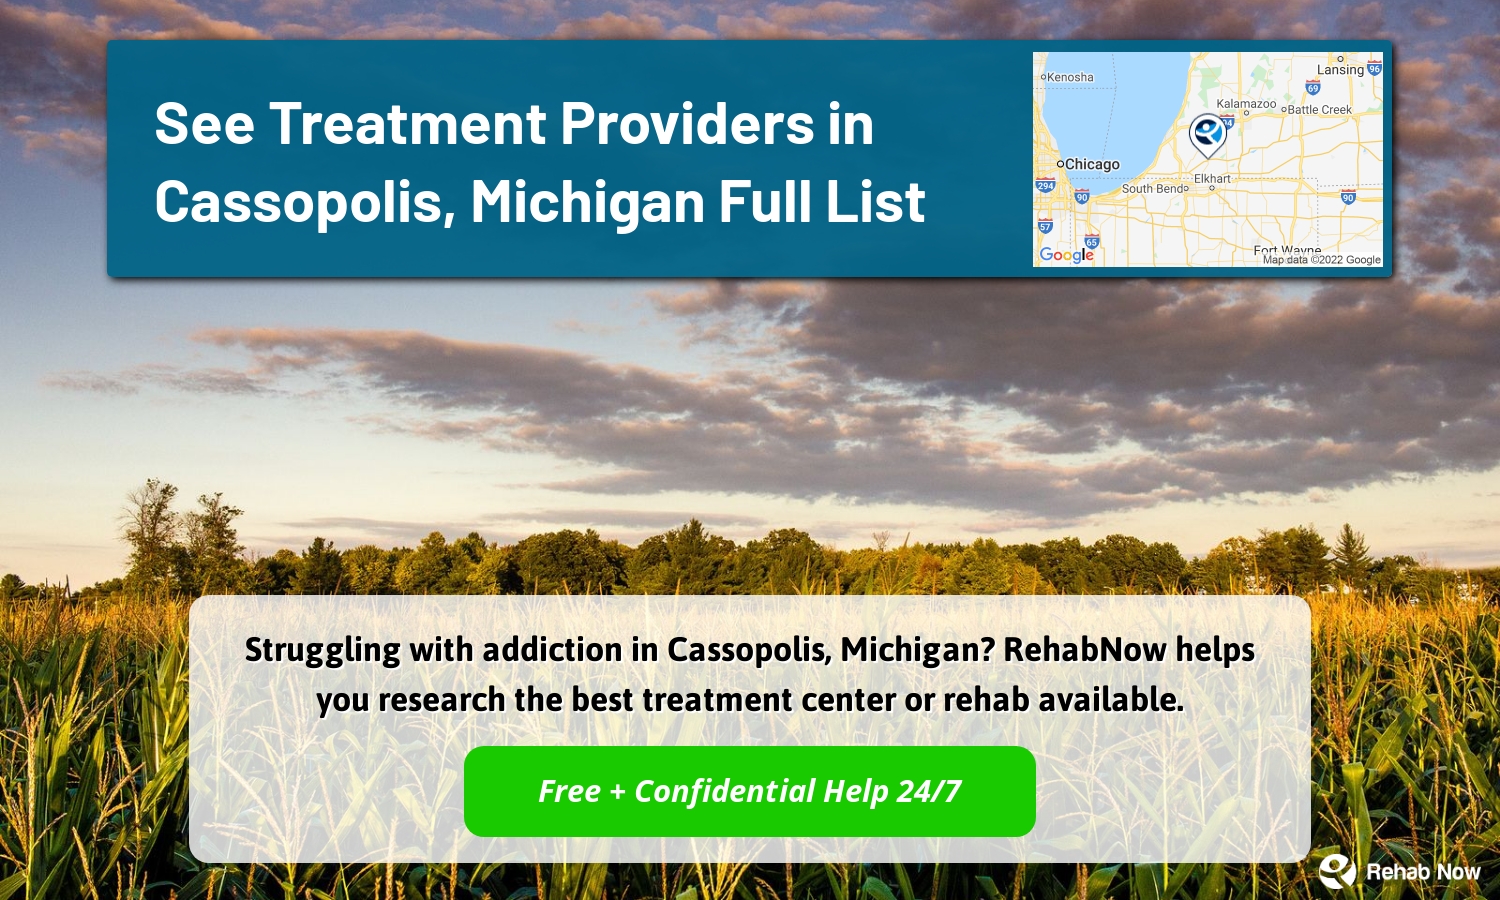 Struggling with addiction in Cassopolis, Michigan? RehabNow helps you research the best treatment center or rehab available.